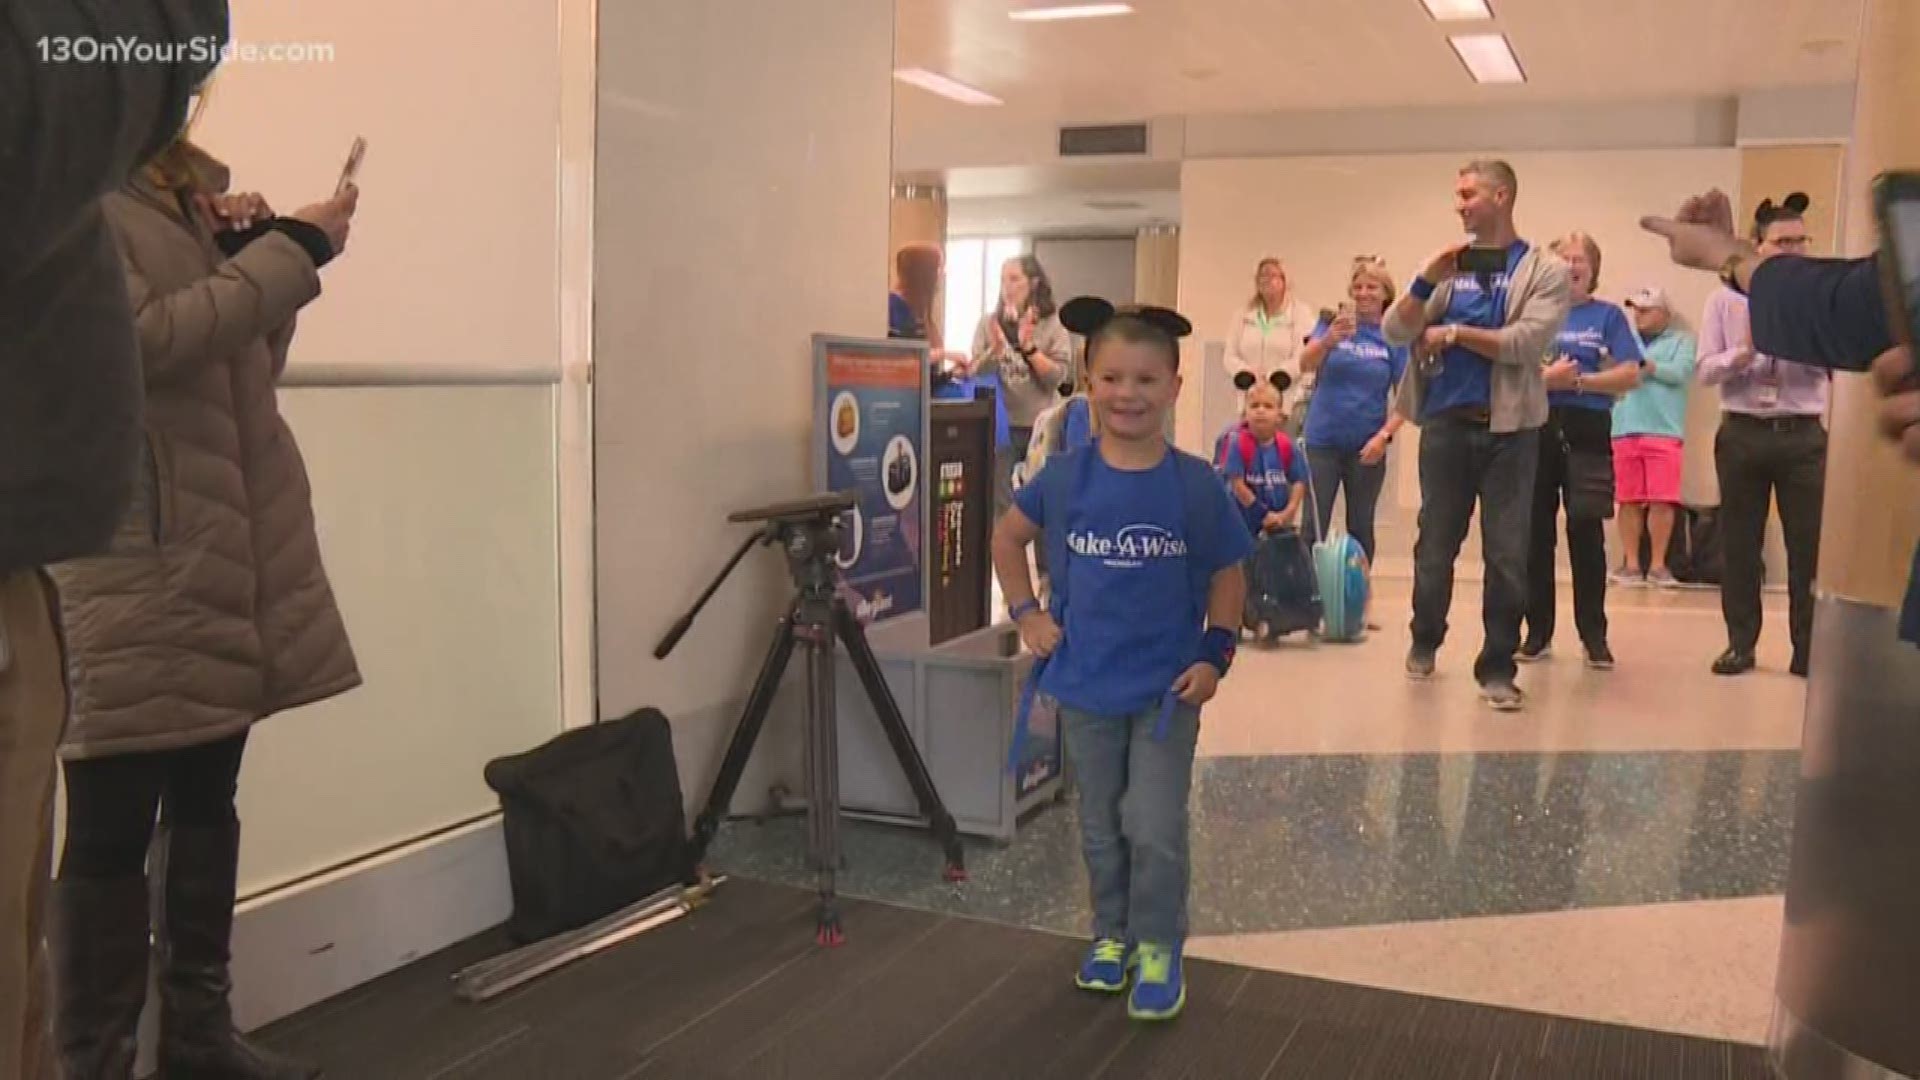 Make-A-Wish Michigan is sending S.J. and his family to Orlando.